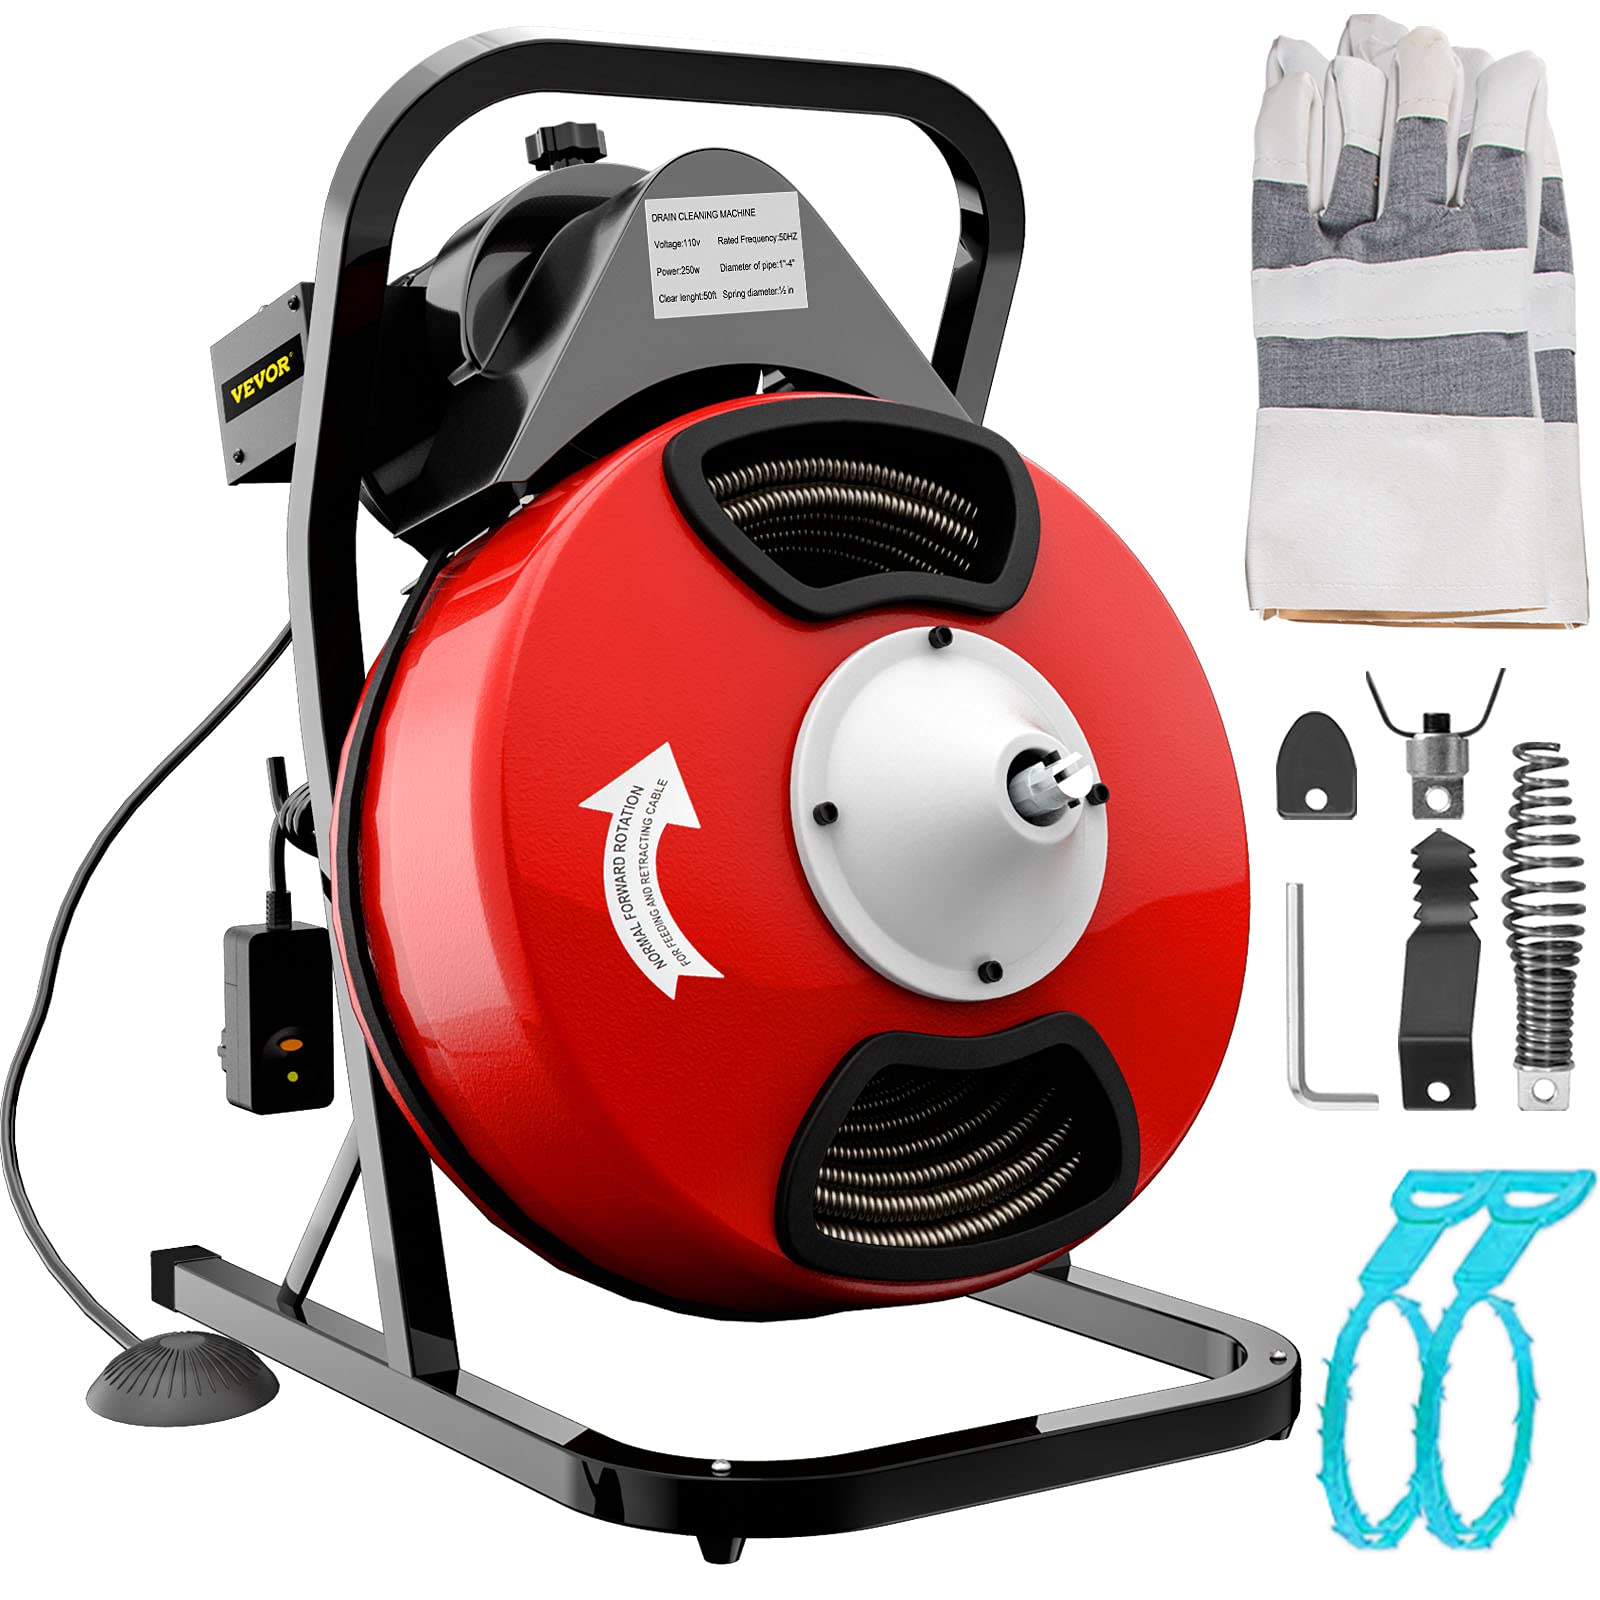 VEVOR 50FTx1/2Inch Drain Cleaner Machine Electric Drain Auger with 4 Cutter & Foot Switch Drain Cleaner Machine Sewer Snake Drill Drain Auger Cleaner for 1" to 4" Pipes $169